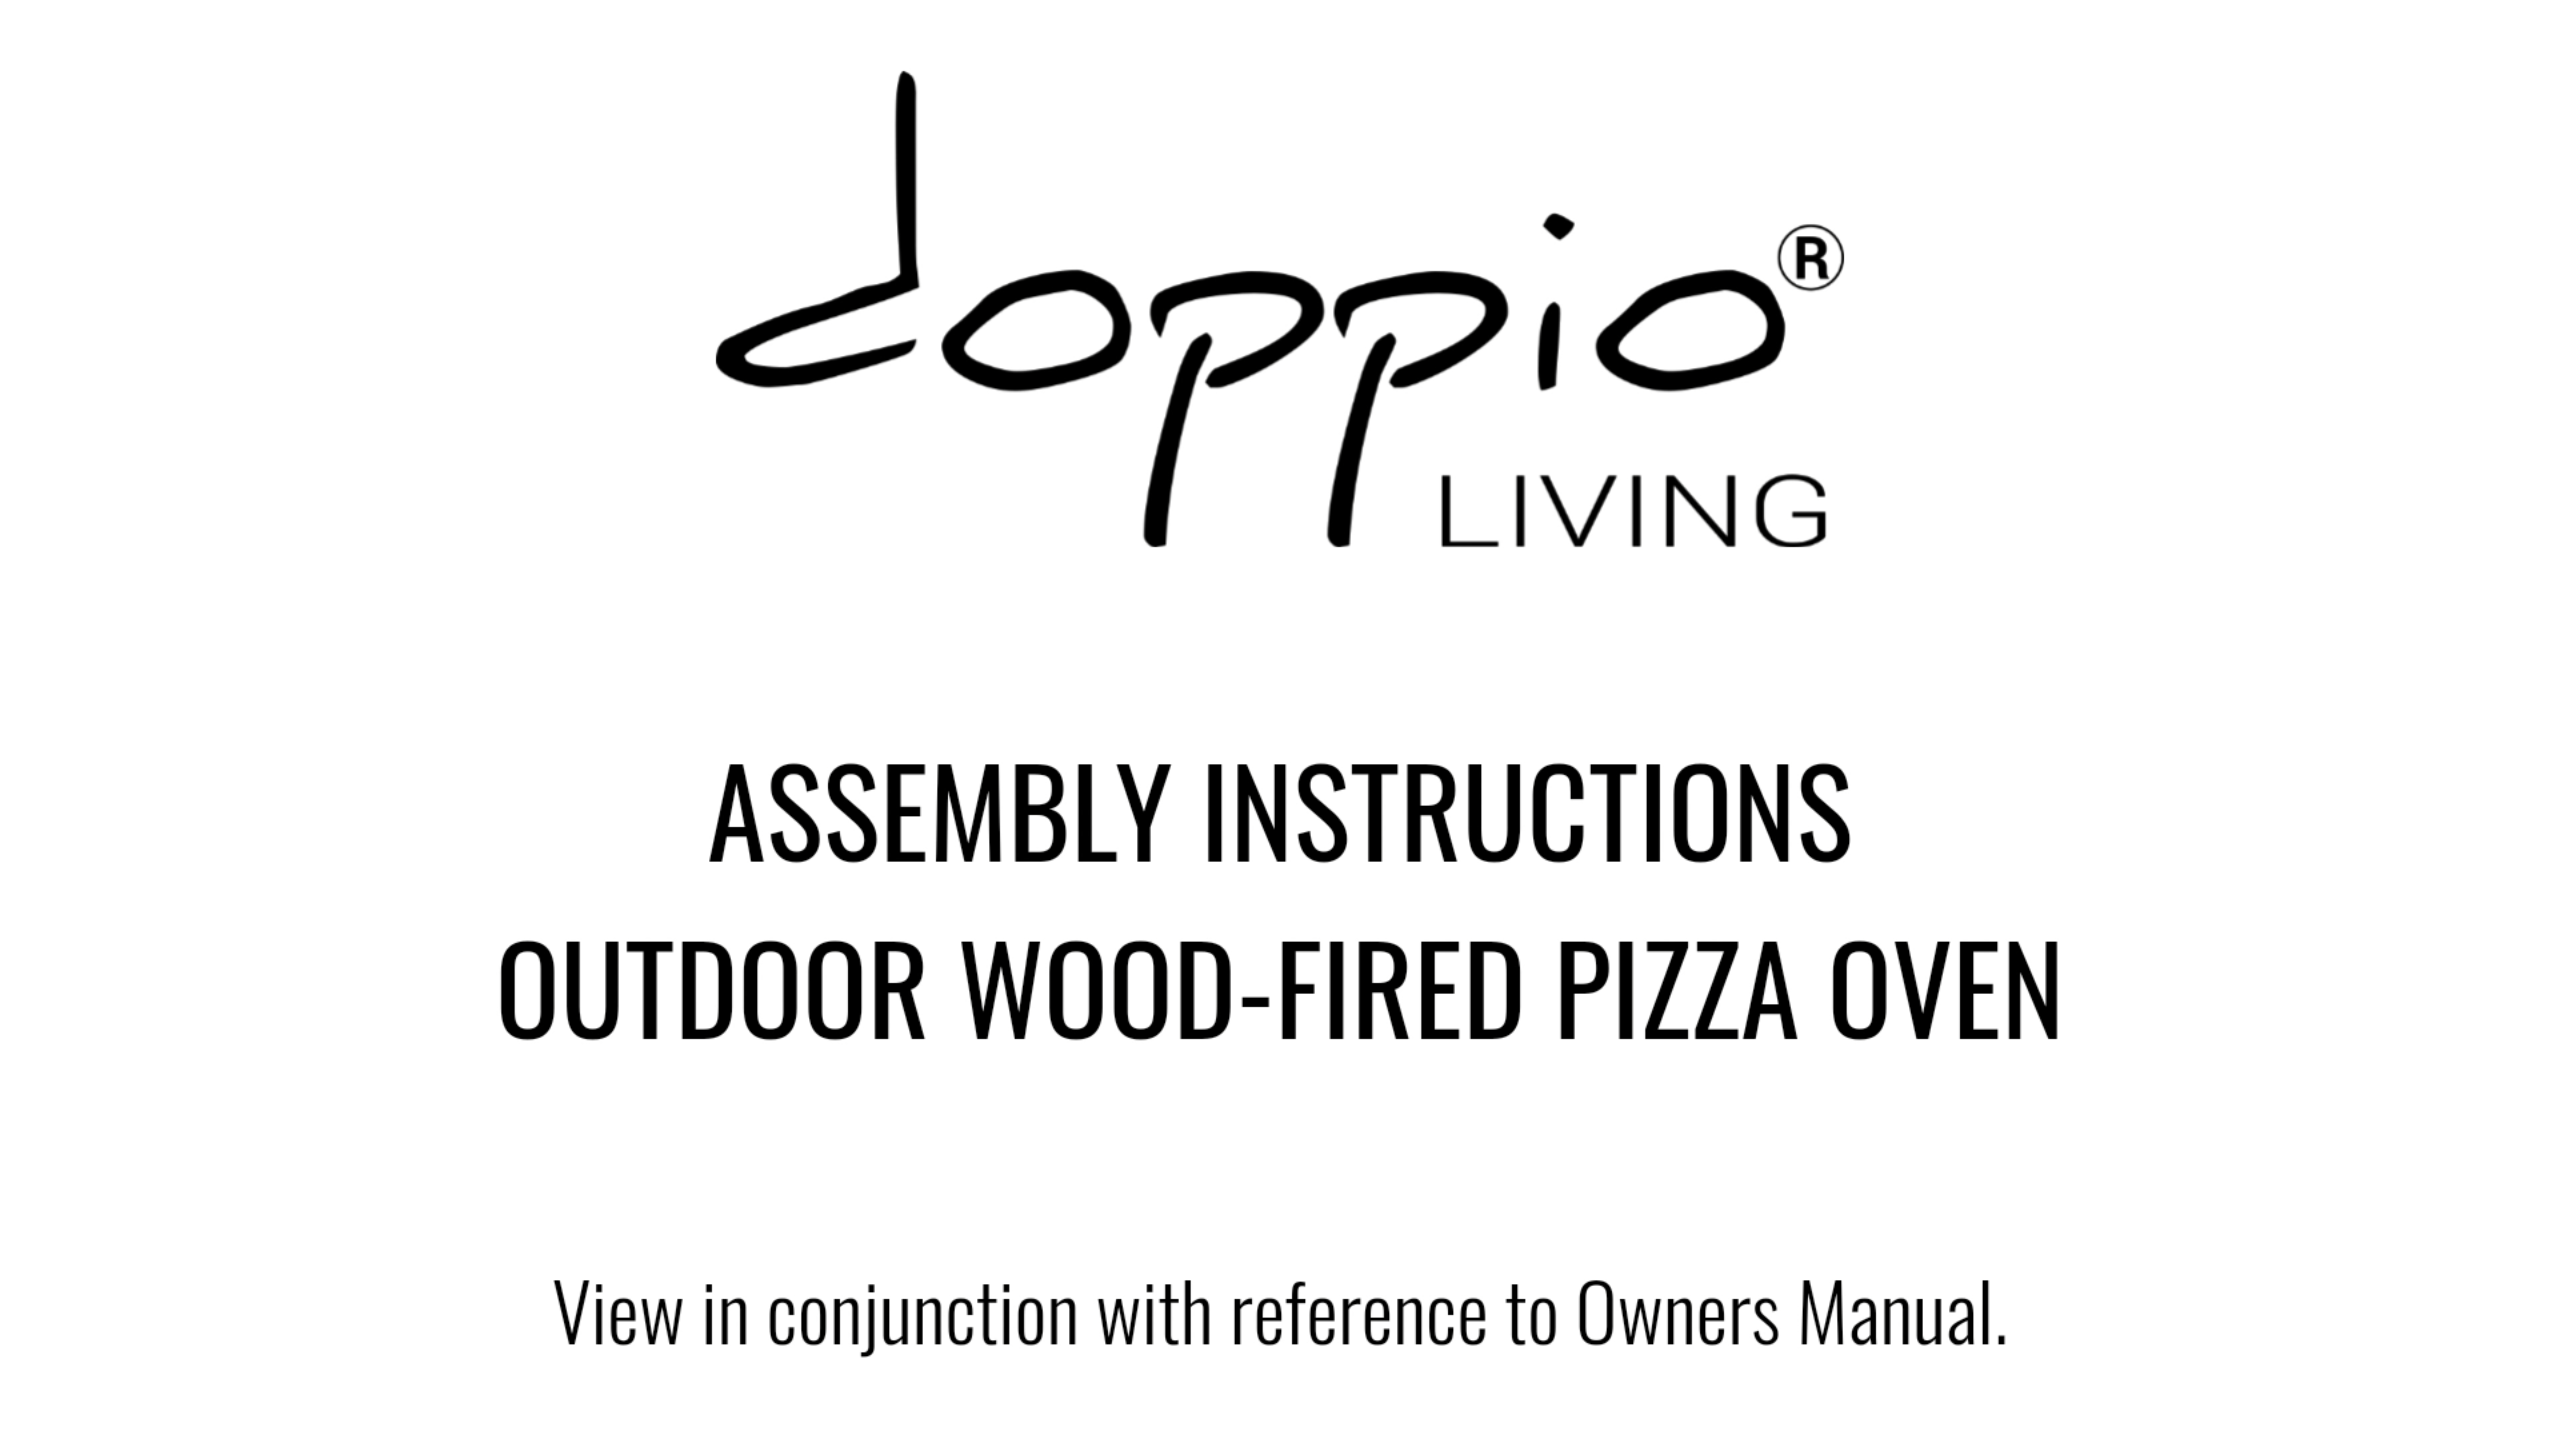 Load video: Assembly instructions for Woodfired Outdoor Pizza Oven